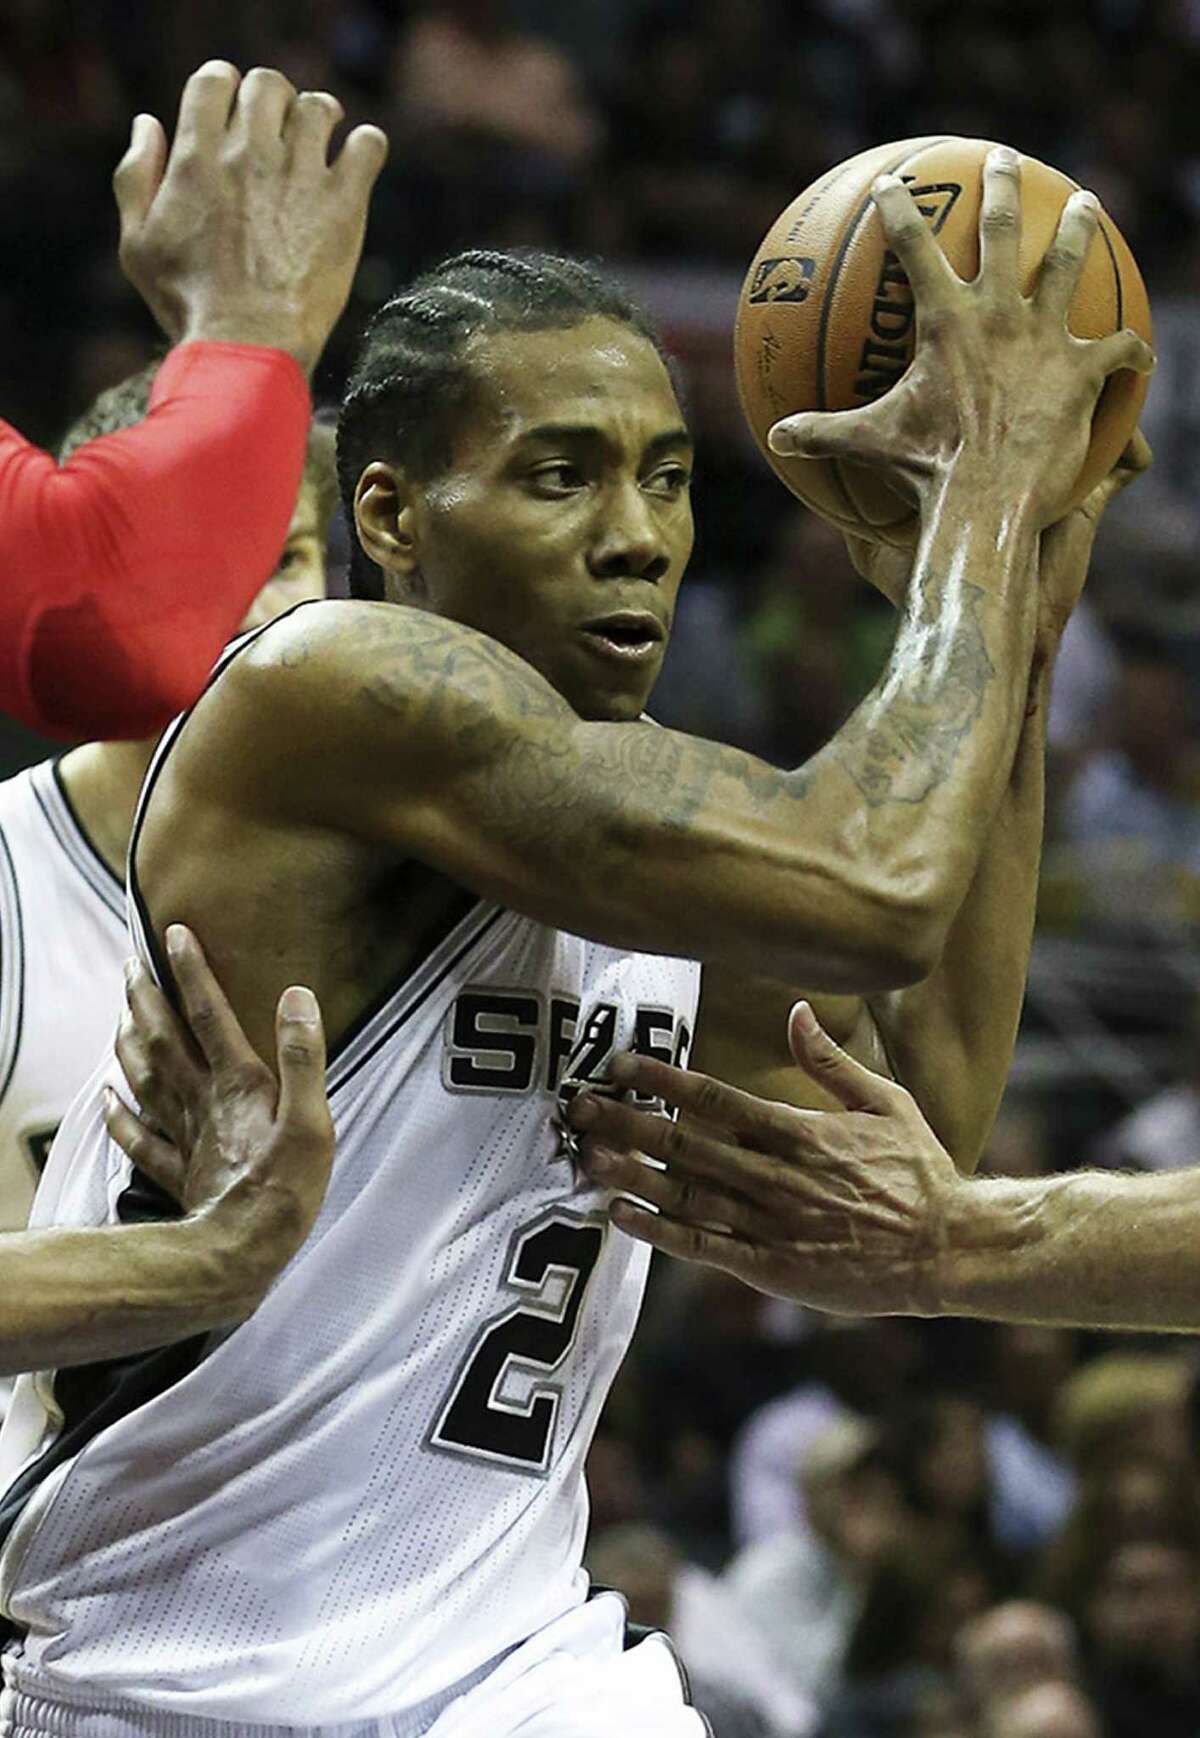 Kawhi Leonard held a tight grip on the Game 5 clincher against Portland with 22 points, seven rebounds and five steals. He will be looking for more of the same while guarding NBA MVP Kevin Durant in the Western Conference finals that tip off tonight.